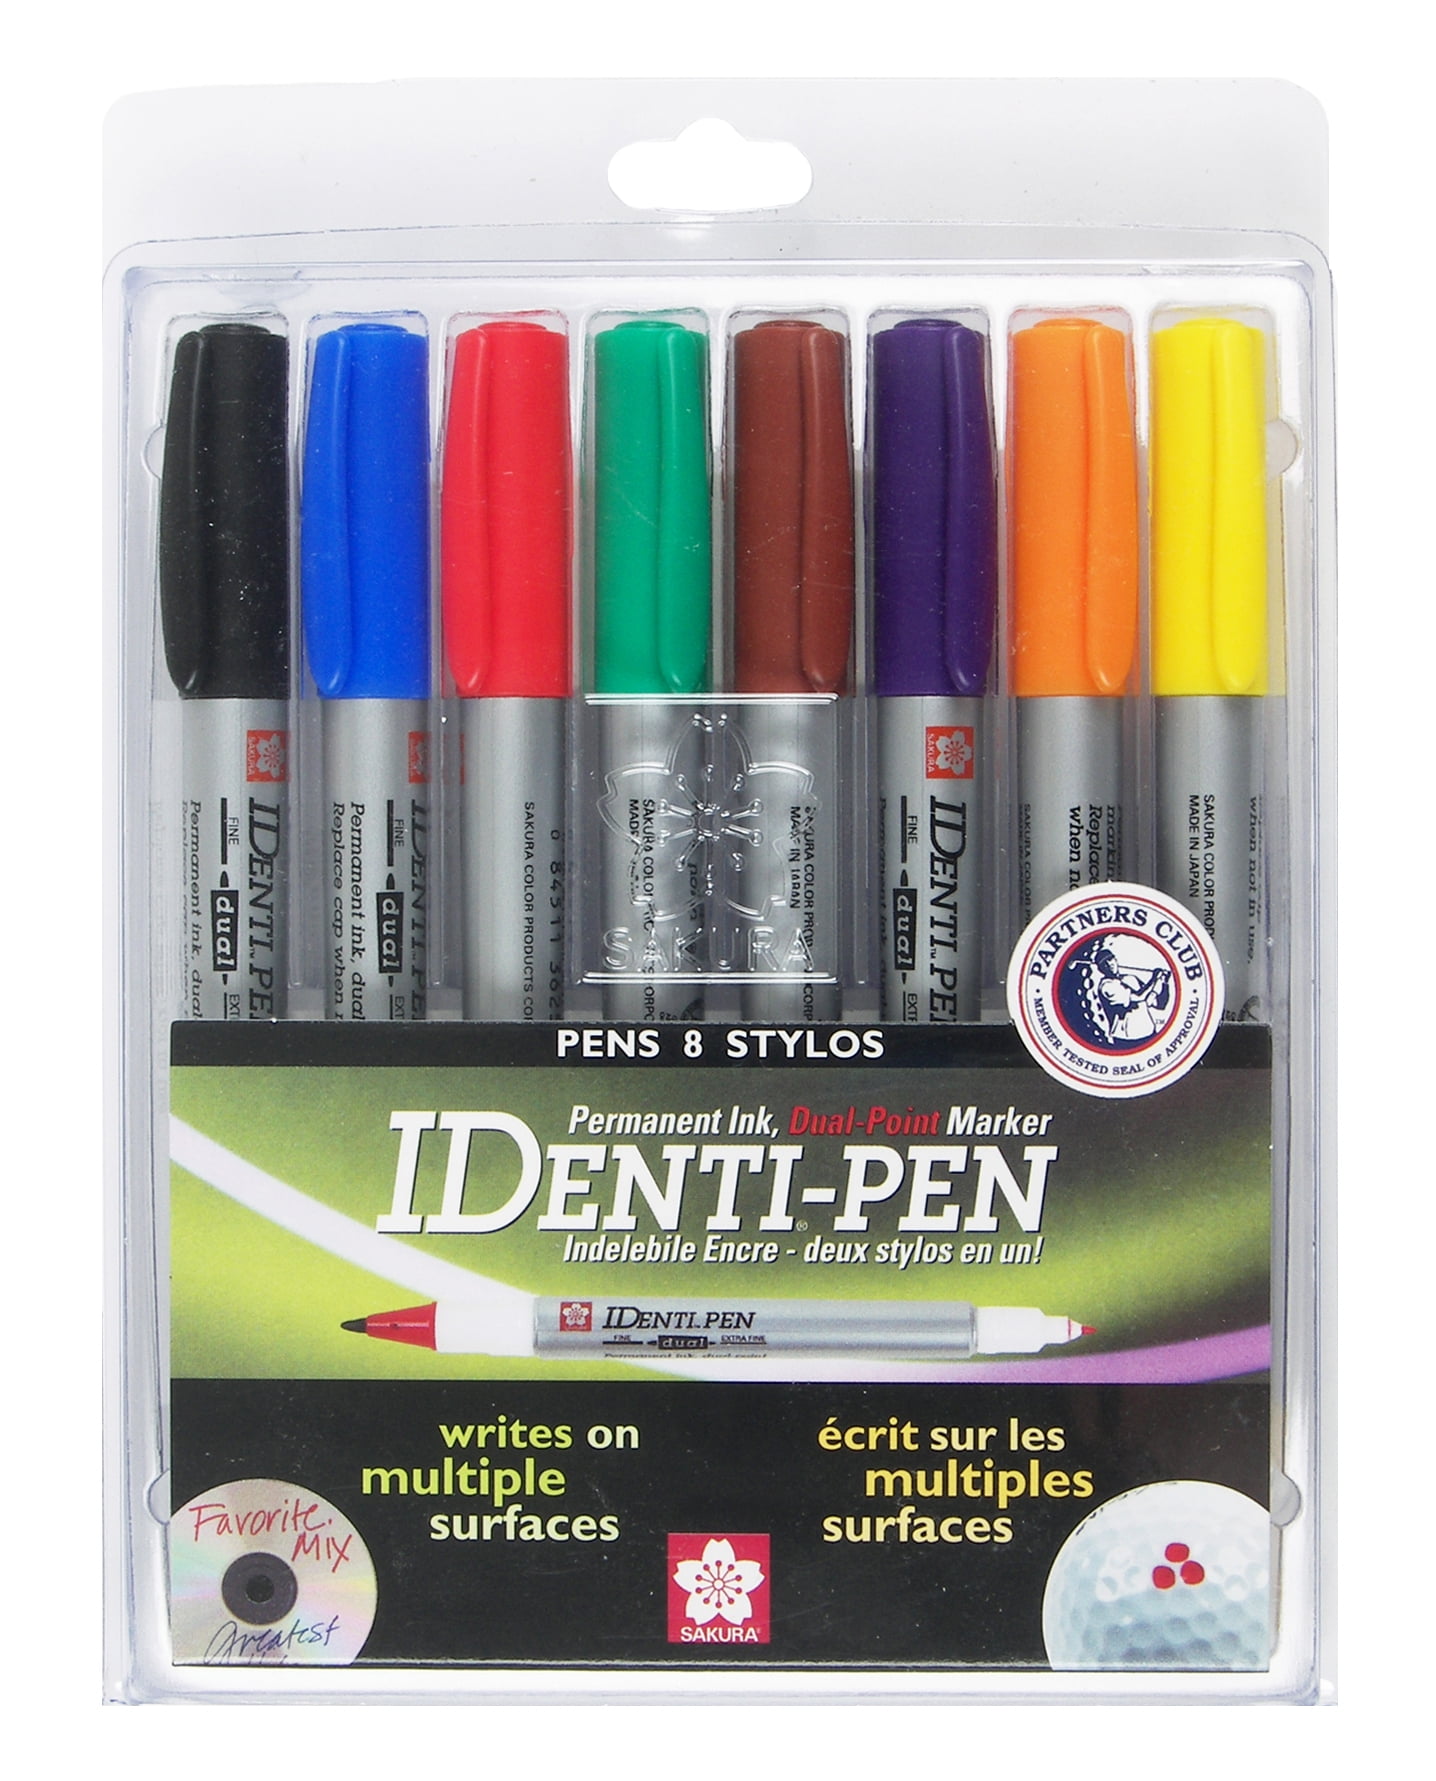 Kingart Pro Extra Fine Point Acrylic Paint Pen Markers, Water-Based Ink, Set of 6 Colors